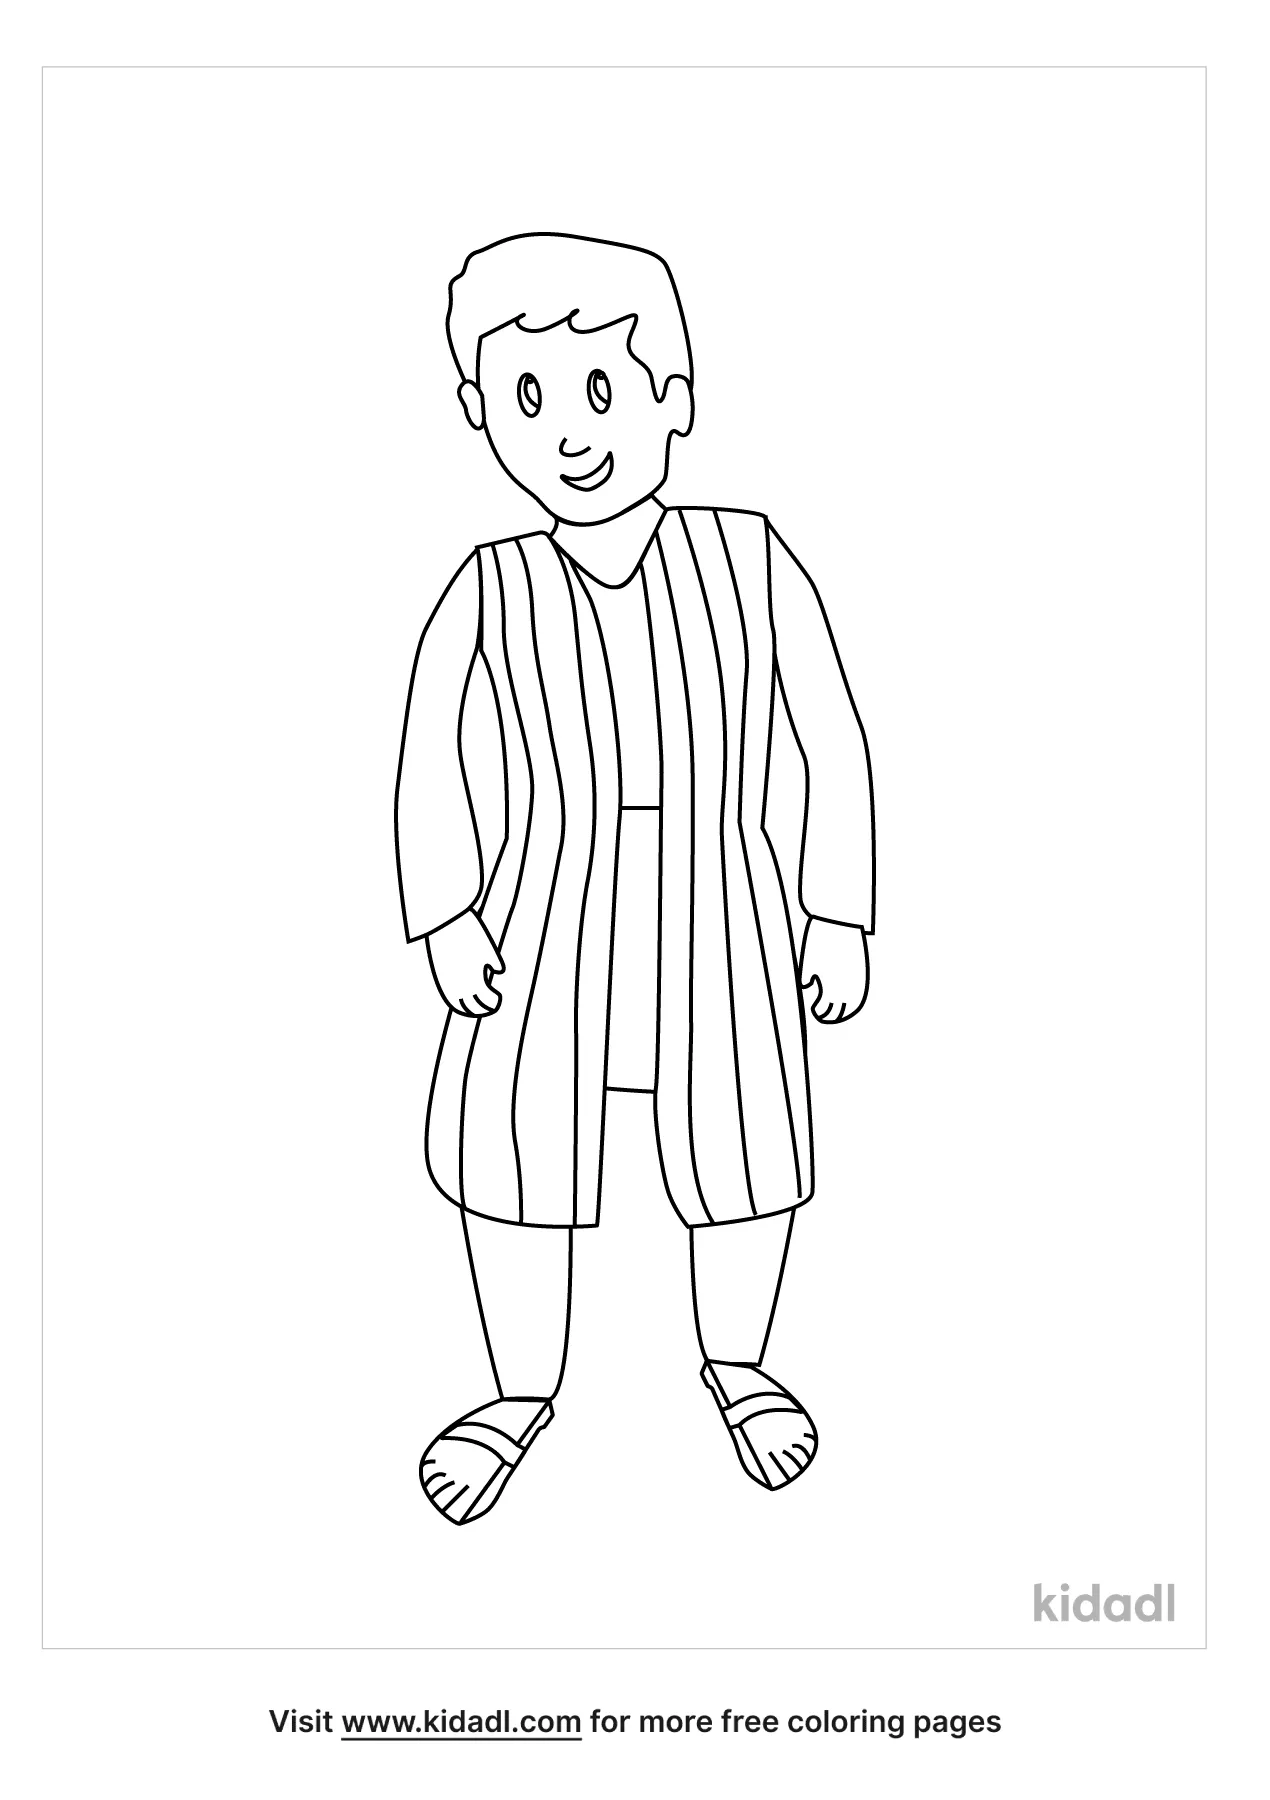 Joseph And The Coat Of Many Colors Coloring Page - COLORINGPAGE.CC